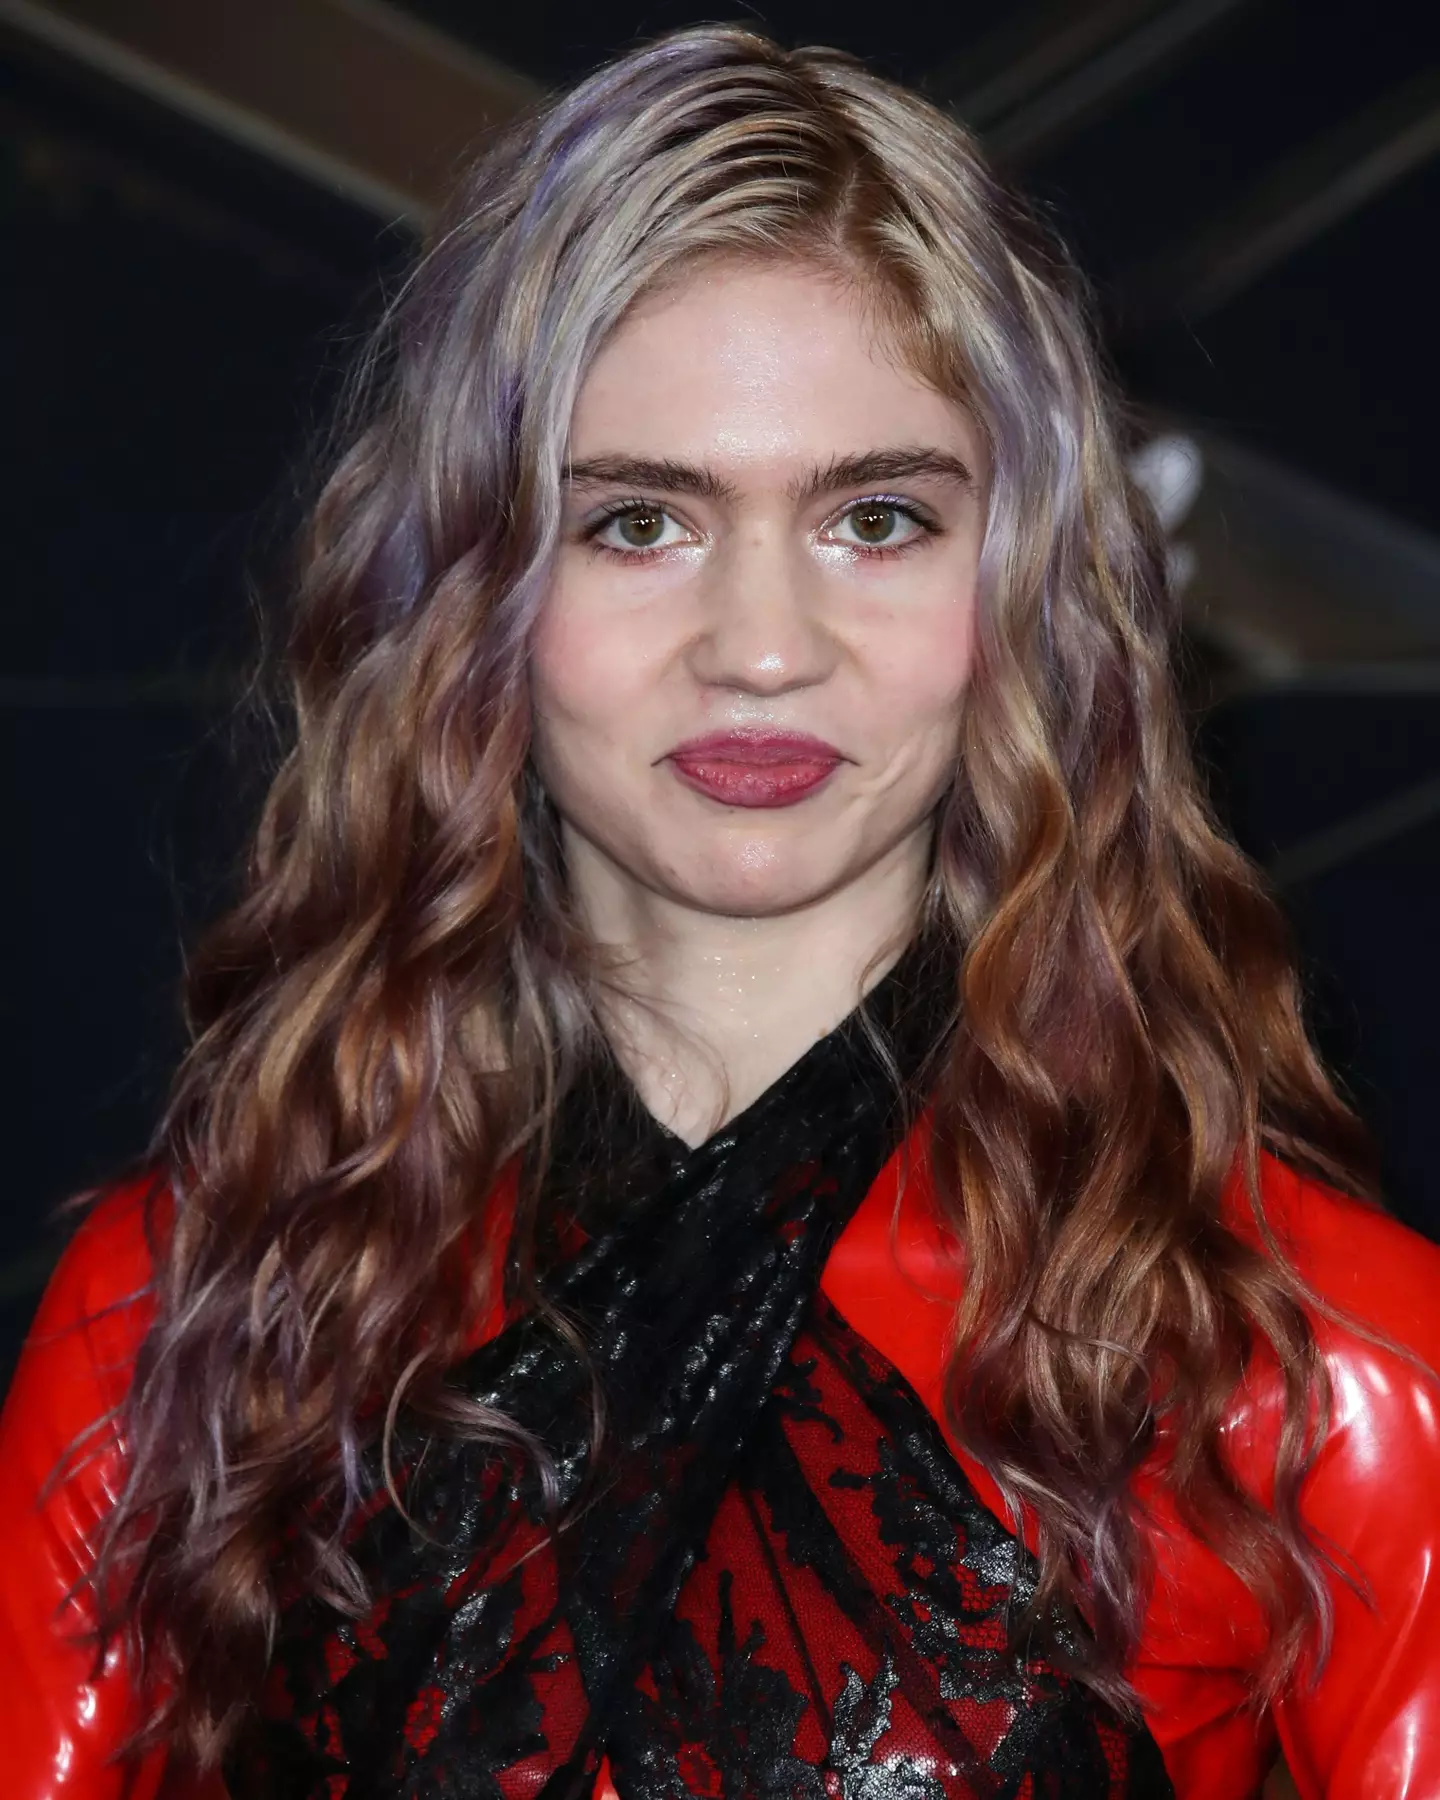 Grimes in 2019.